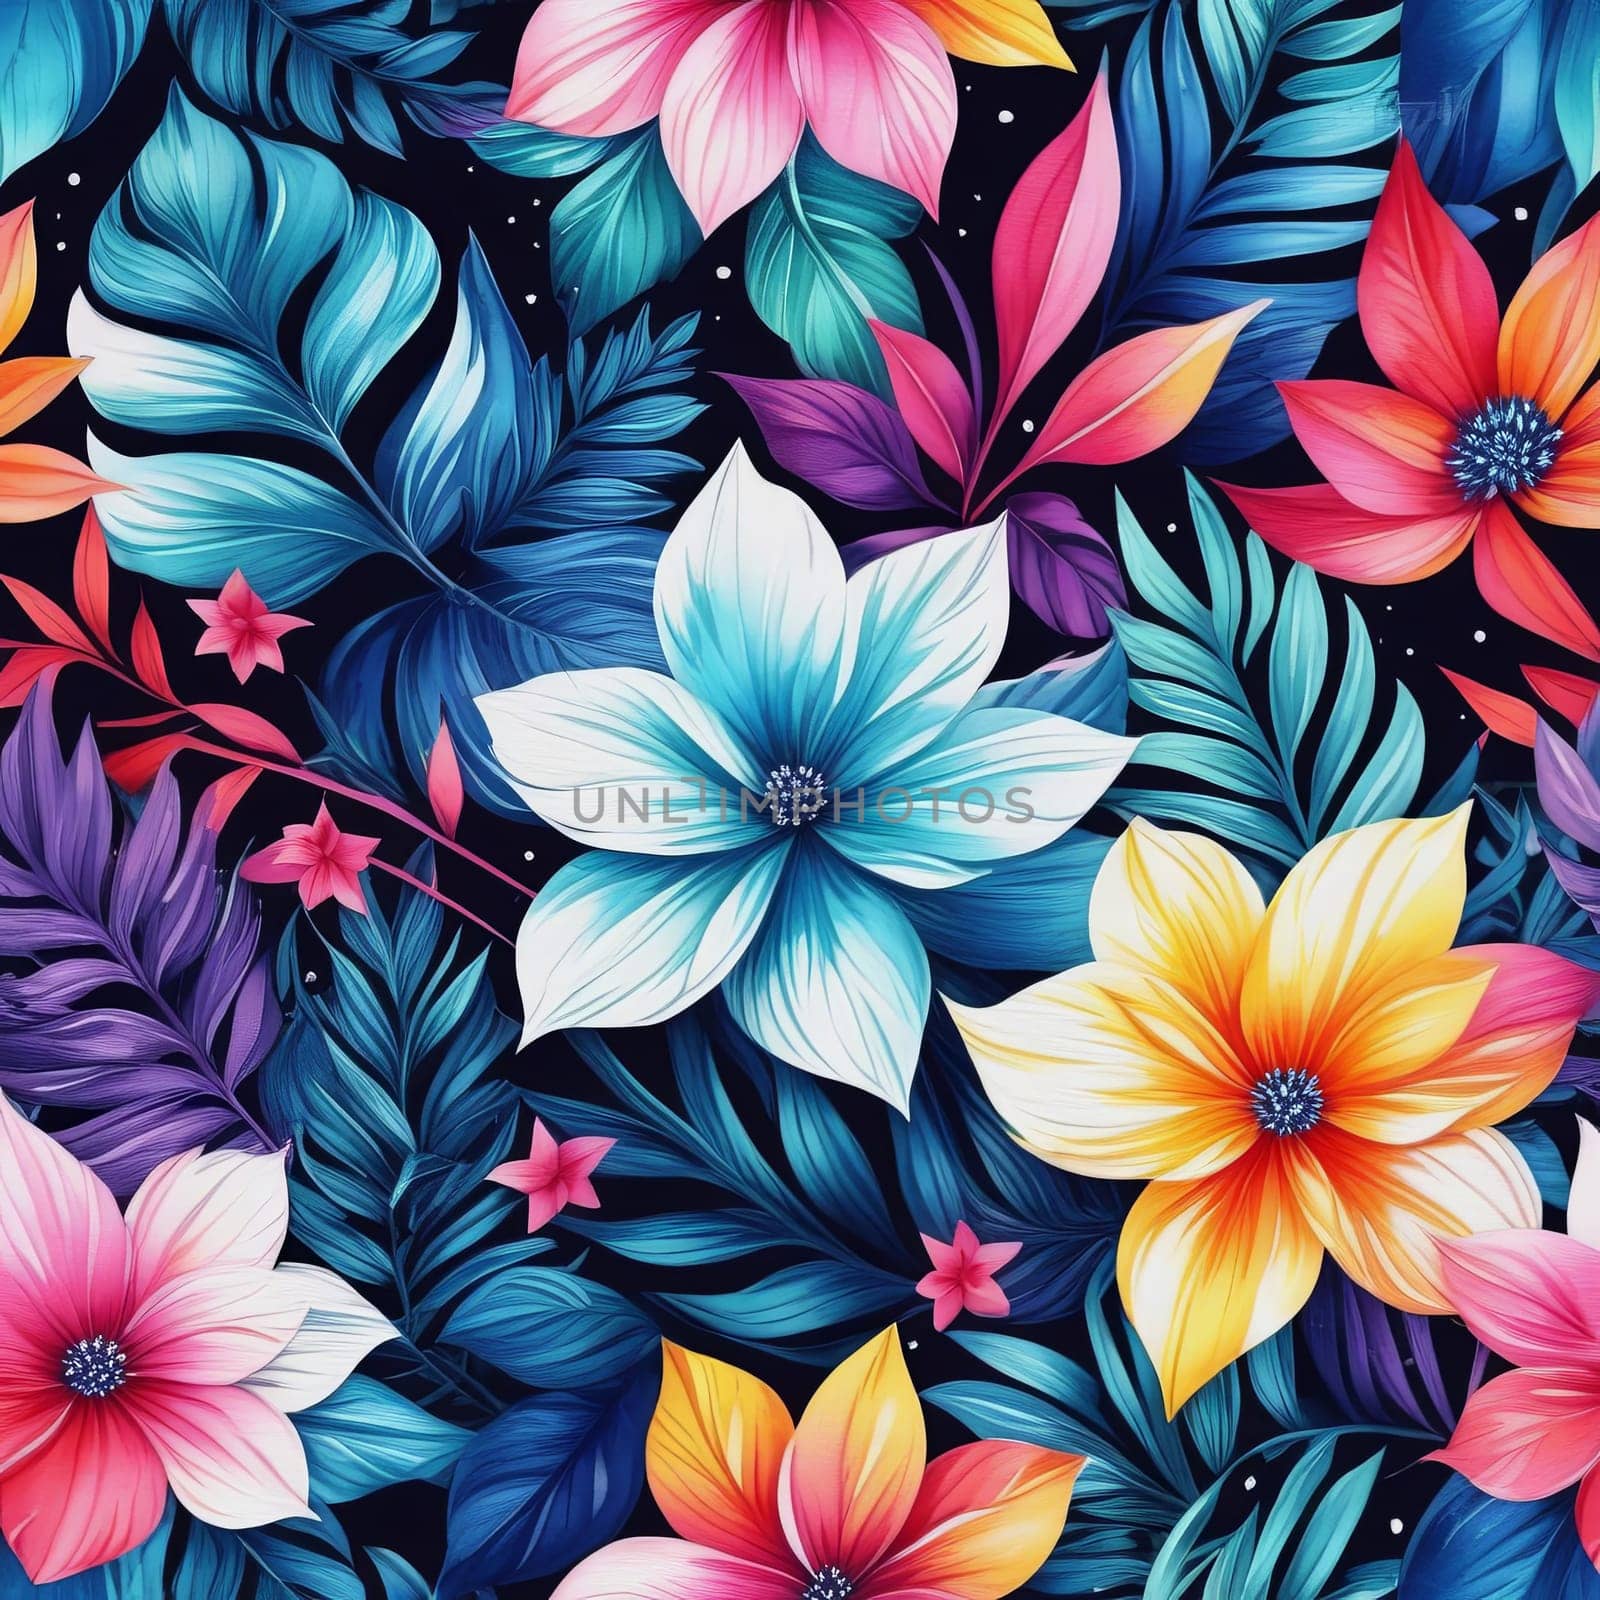 Bright colors of flowers pop out against black background, enhancing their beauty, making them focal point of image. For interior design, decoration, advertising, web design, as illustration for book. by Angelsmoon